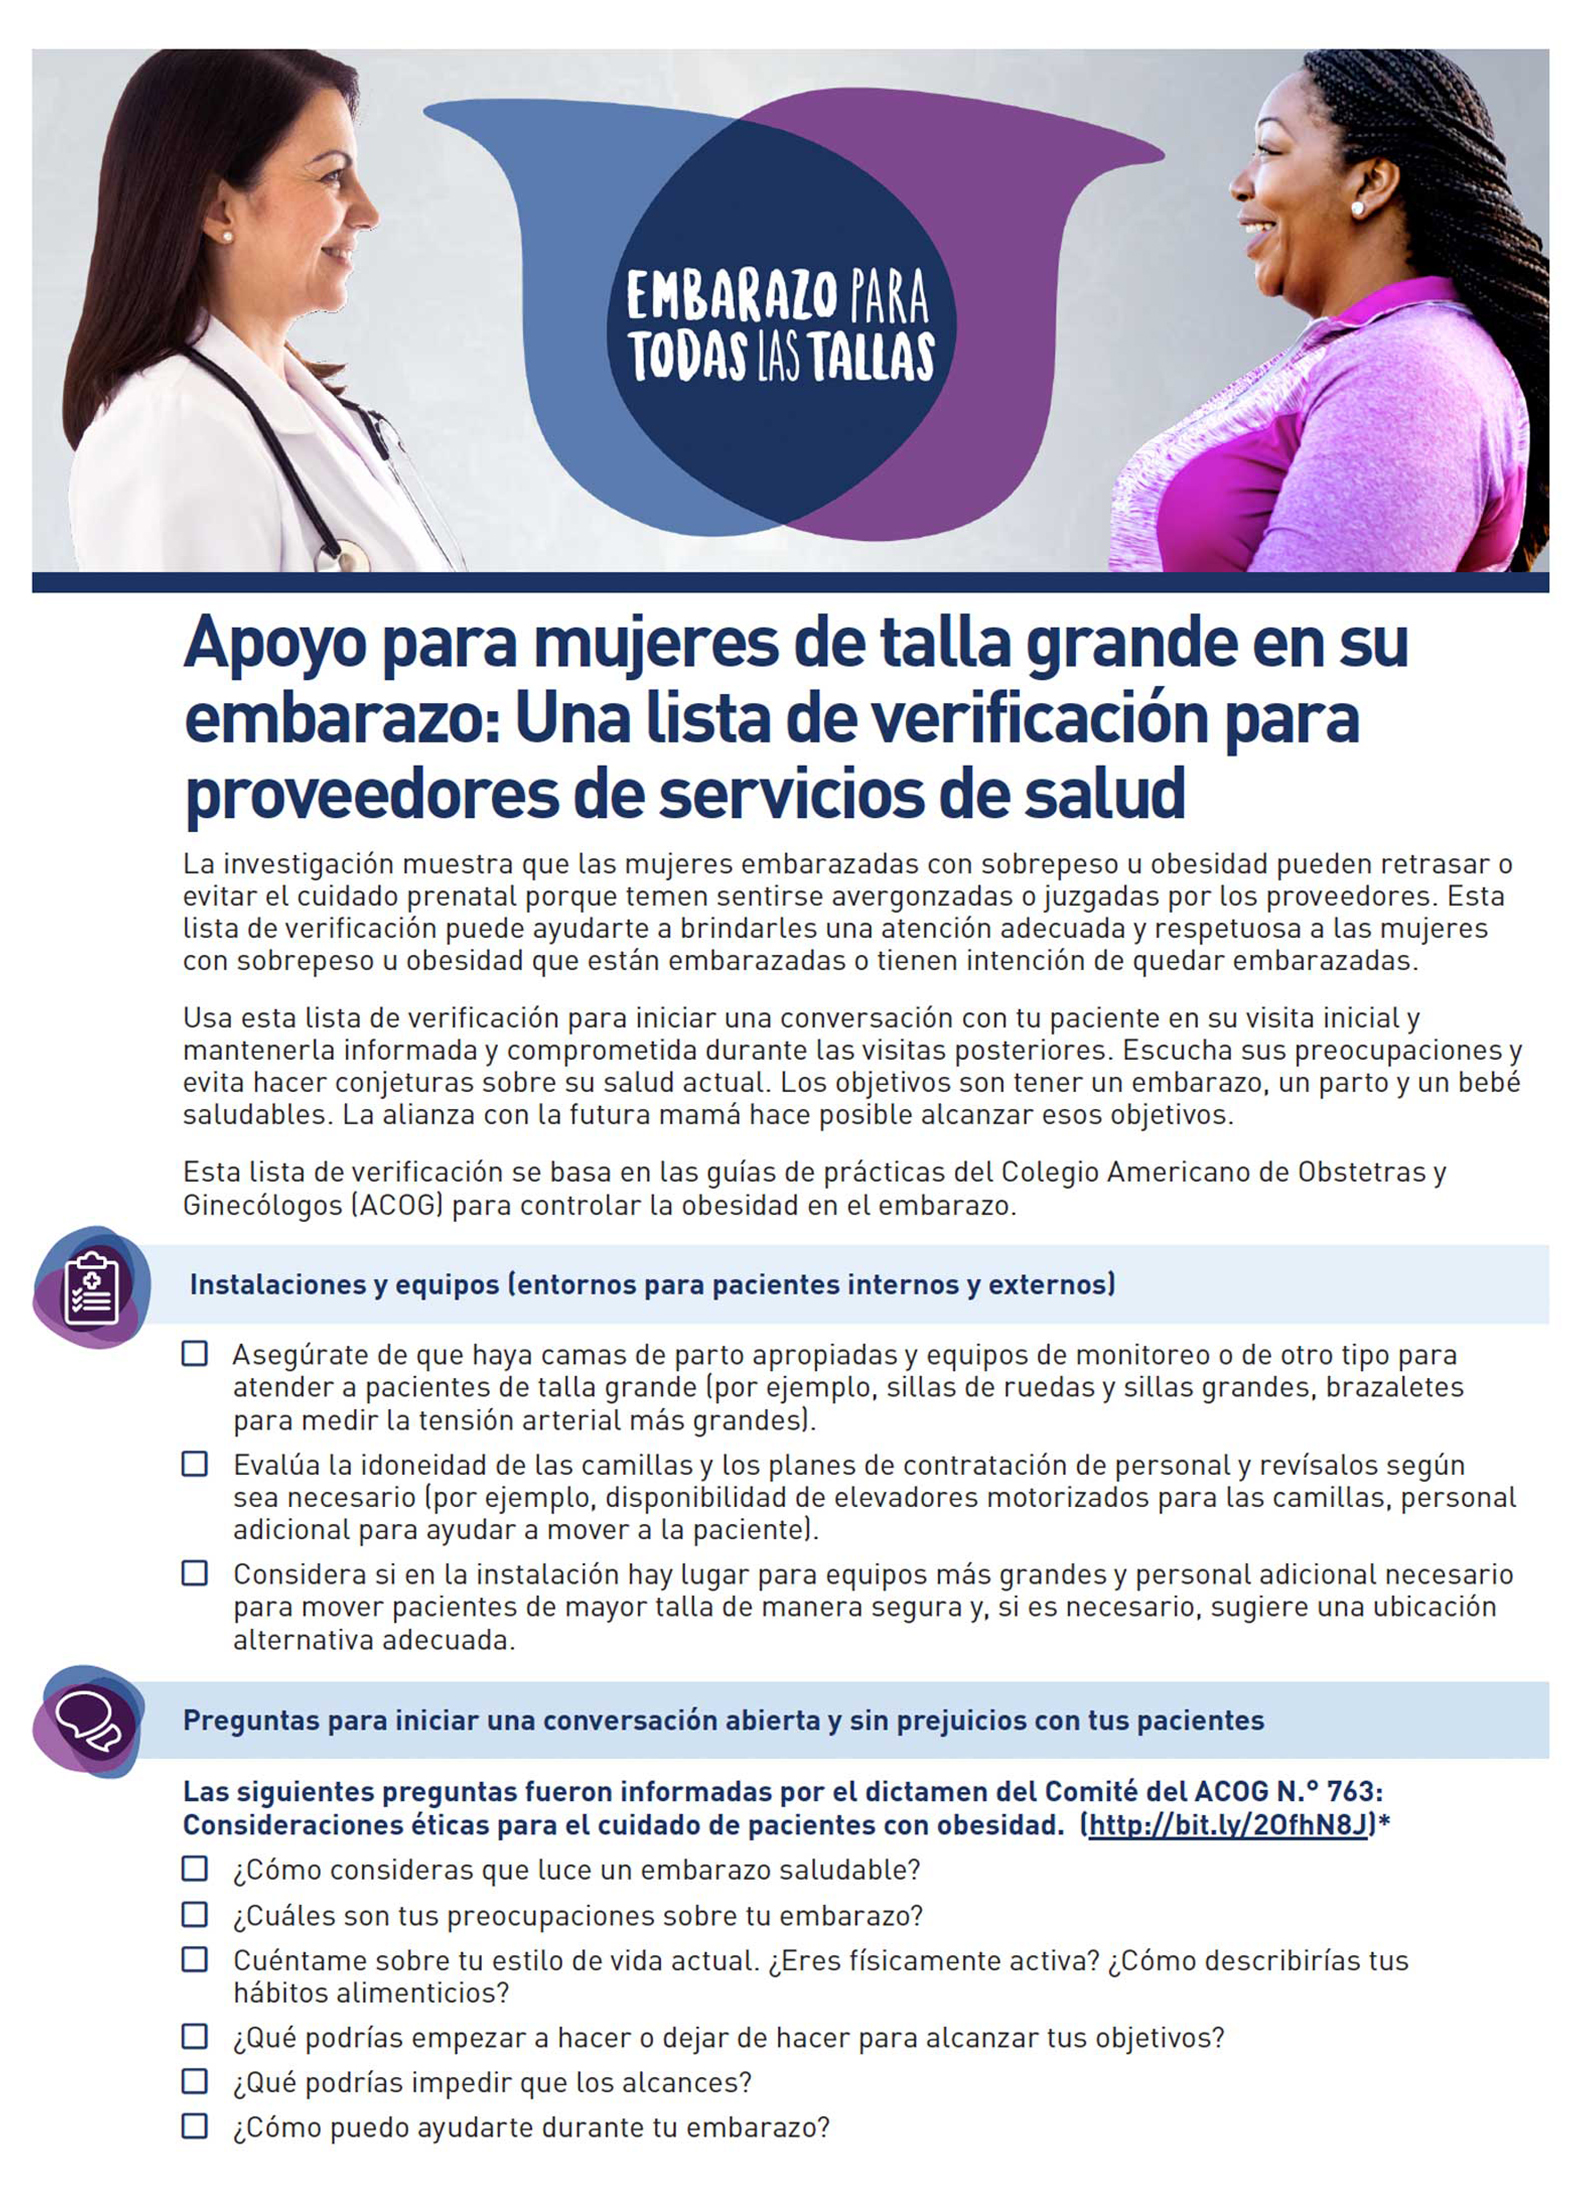 Embarazo todas las tallas: Materiales - NCMHEP | NICHD - Eunice Kennedy National Institute of Child Health and Human Development